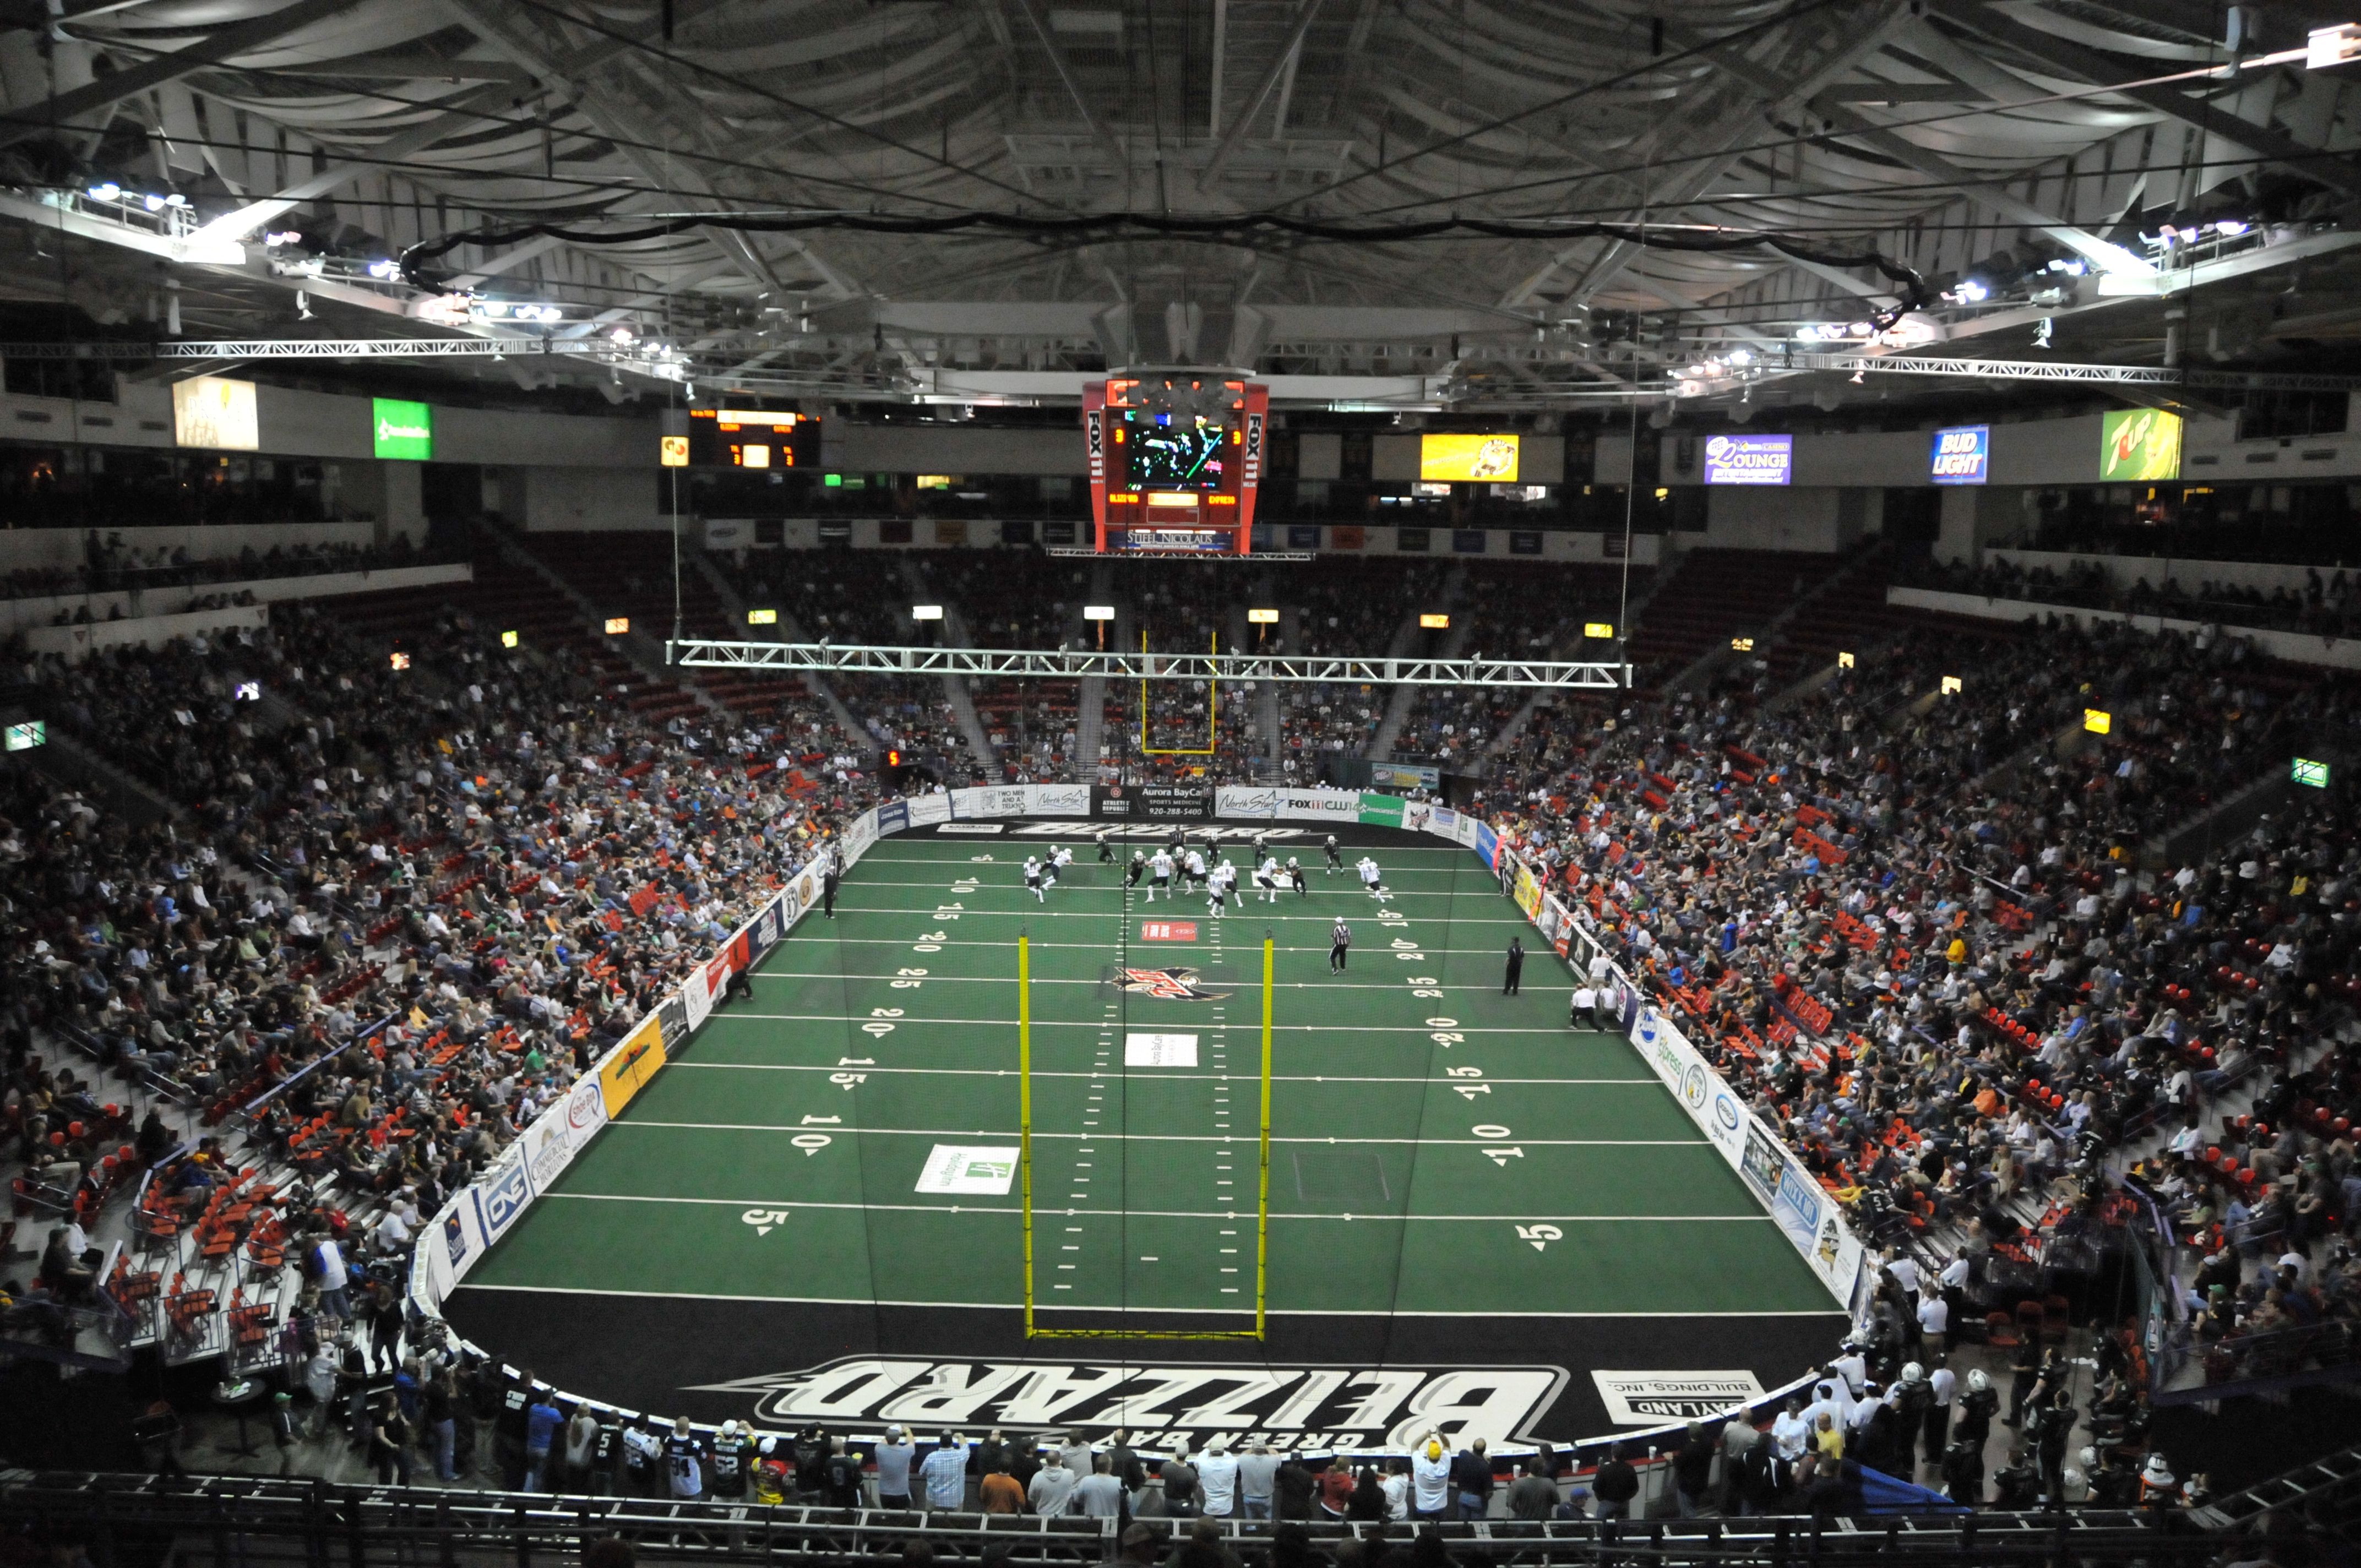 Green Bay Blizzard Luxury Suite with 16 Tickets to a Green Bay Blizzard